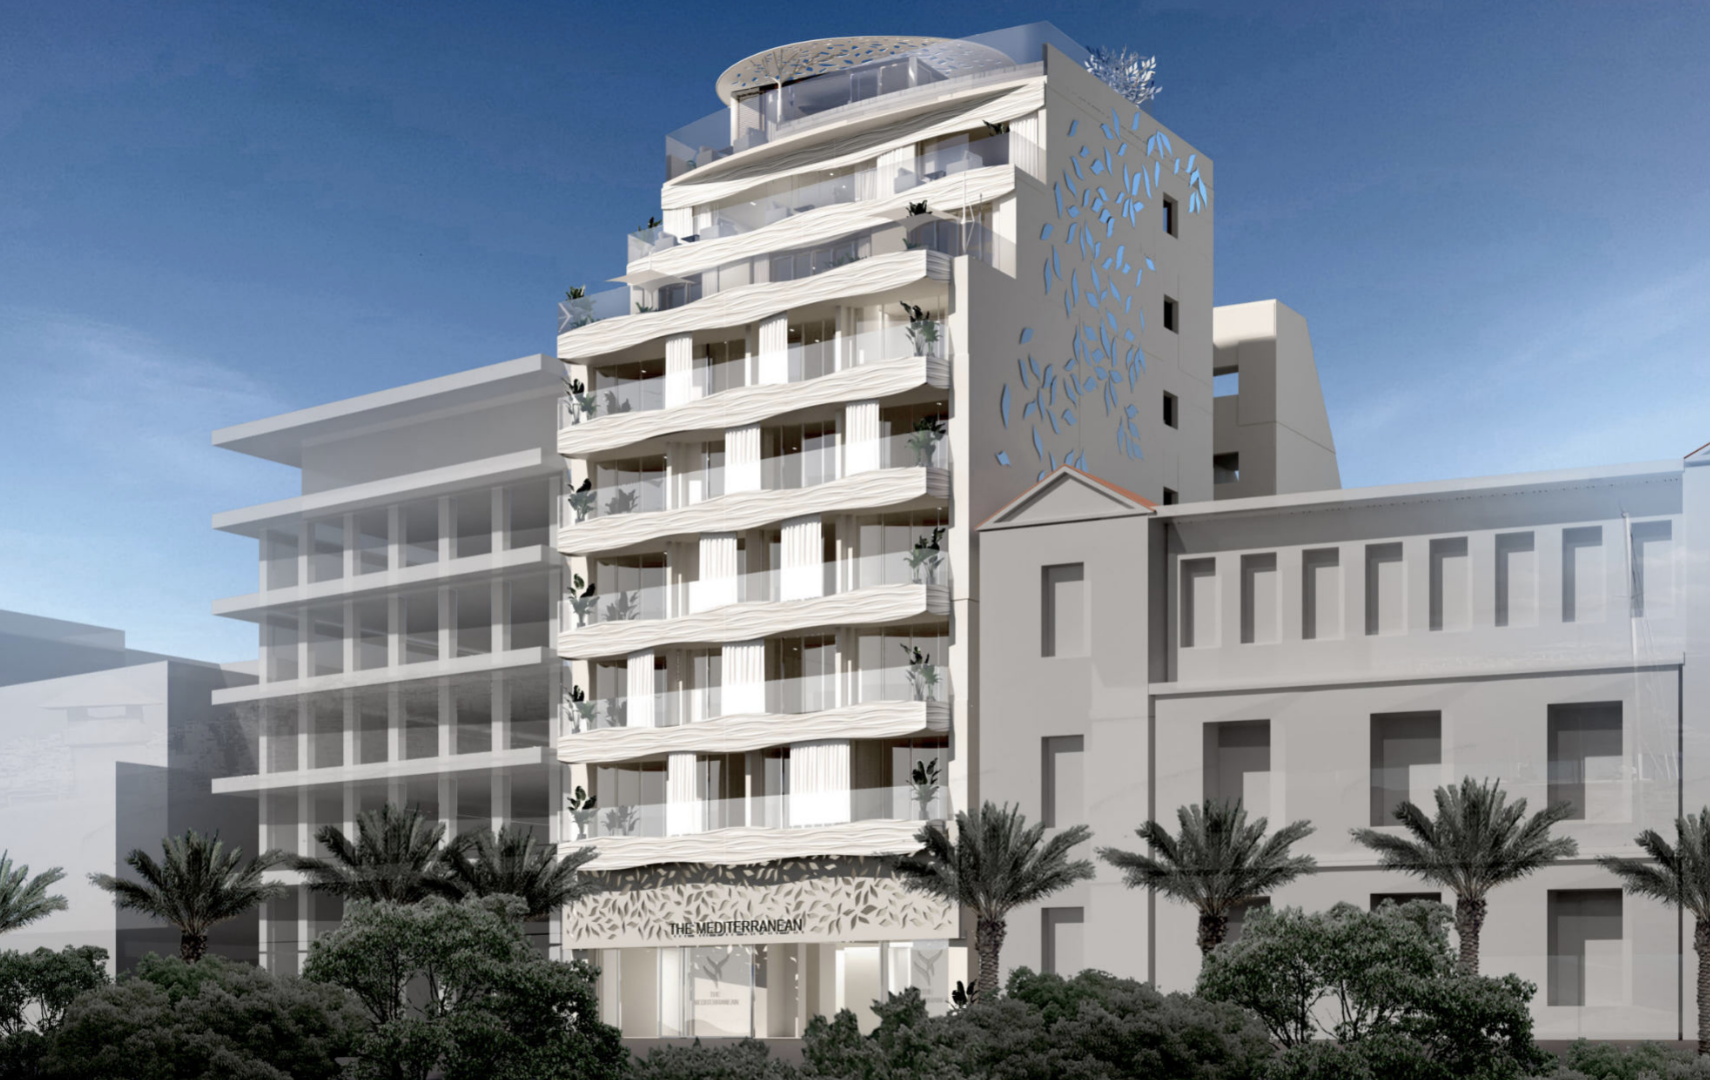 Freehold & Guaranteed ROI 1 Bedroom Apartments For Sale in 5 Star Resort in Attica, Greece - Ideal Homes International